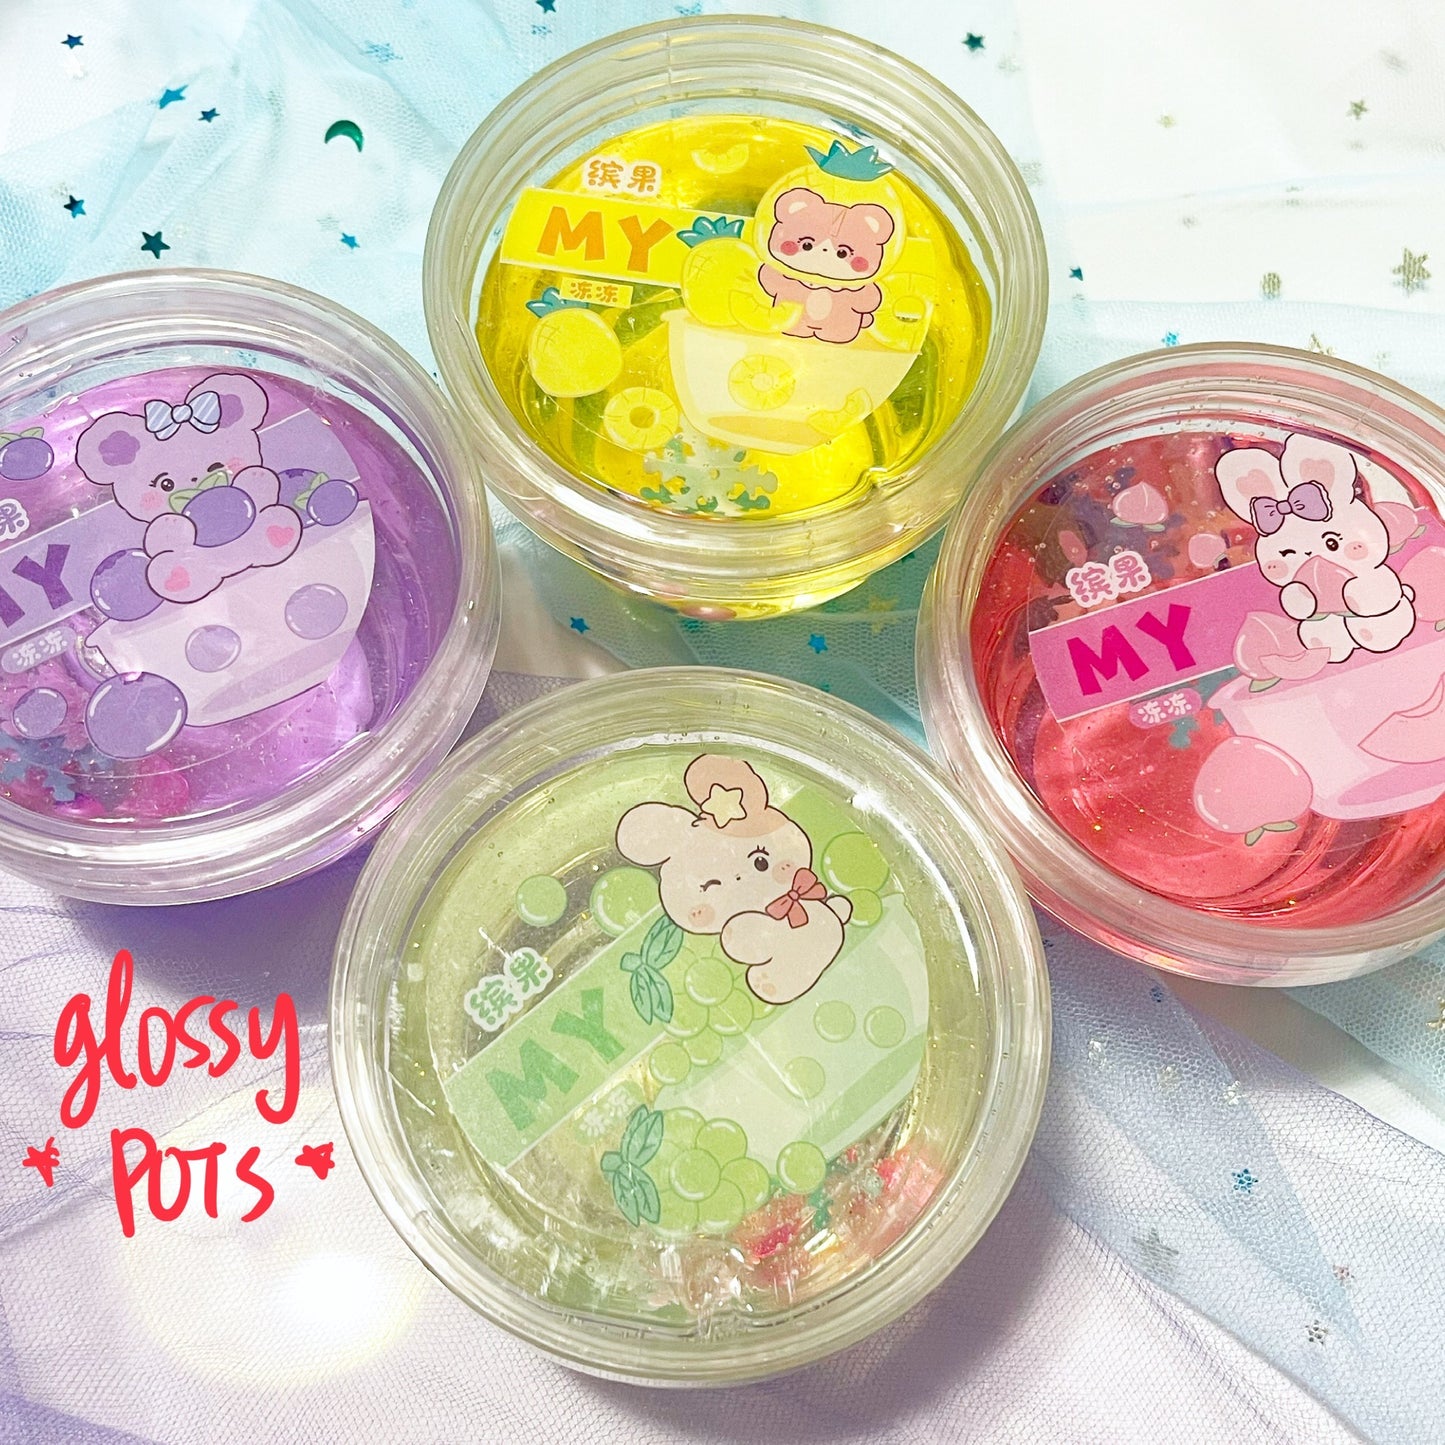 Assorted slime and putties